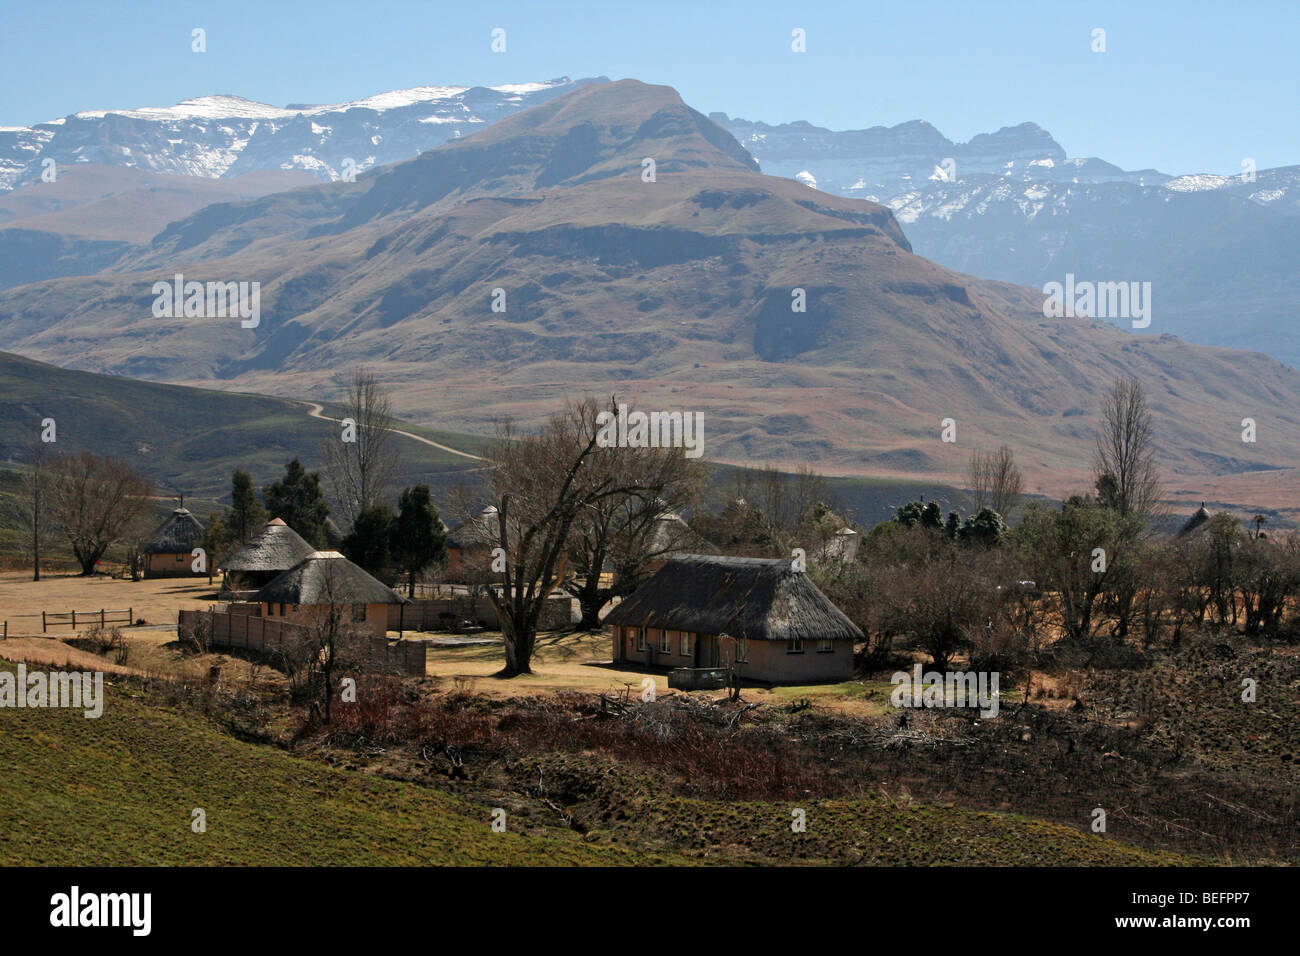 Remote Chalets In The Drakensberg Mountains, South Africa Stock Photo